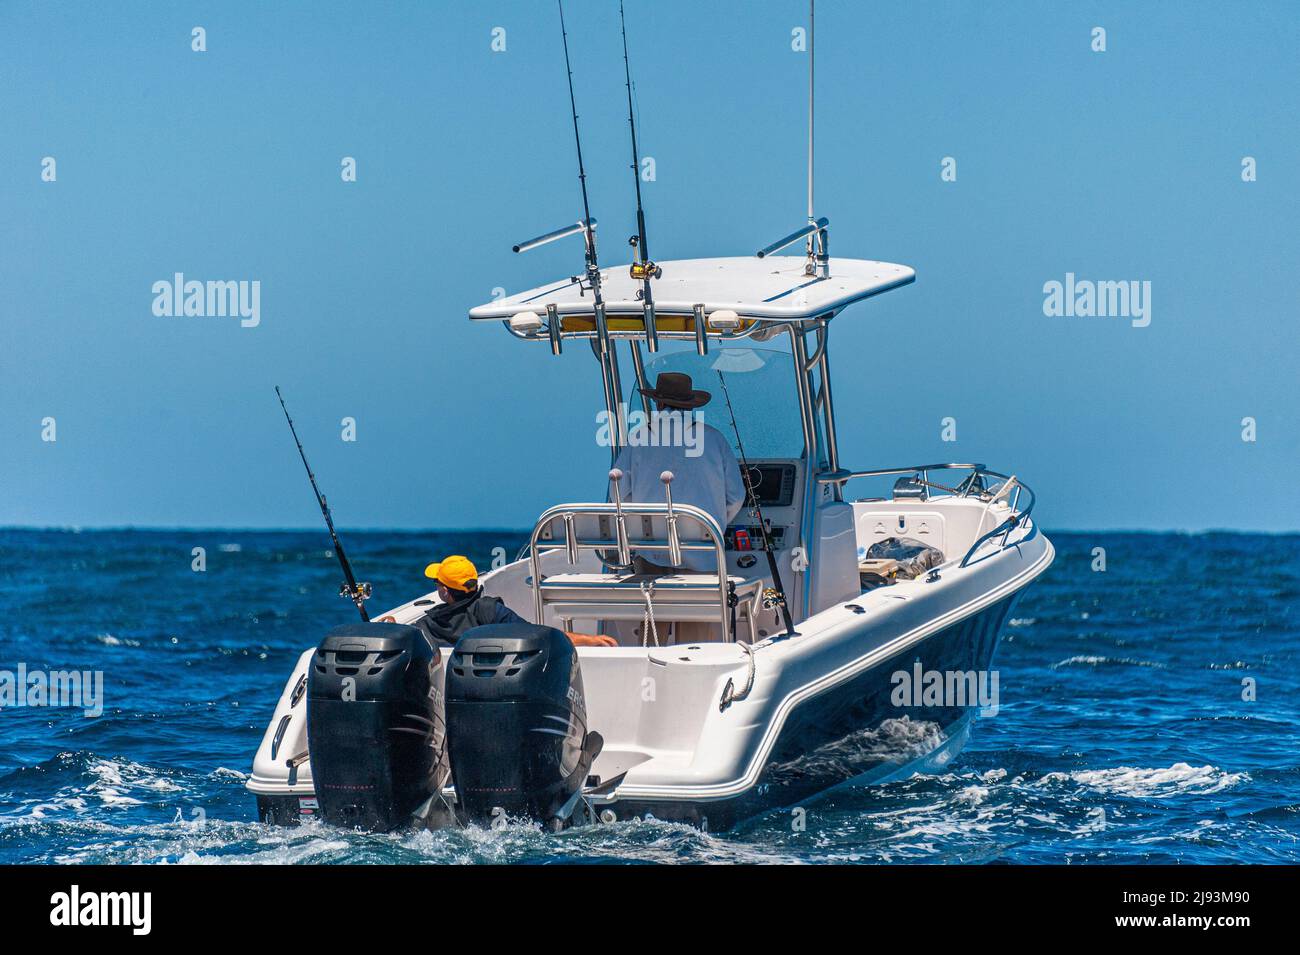 Twin outboard motors power a fishing and pleasure cruiser at sea, with fishing rods visible. Stock Photo